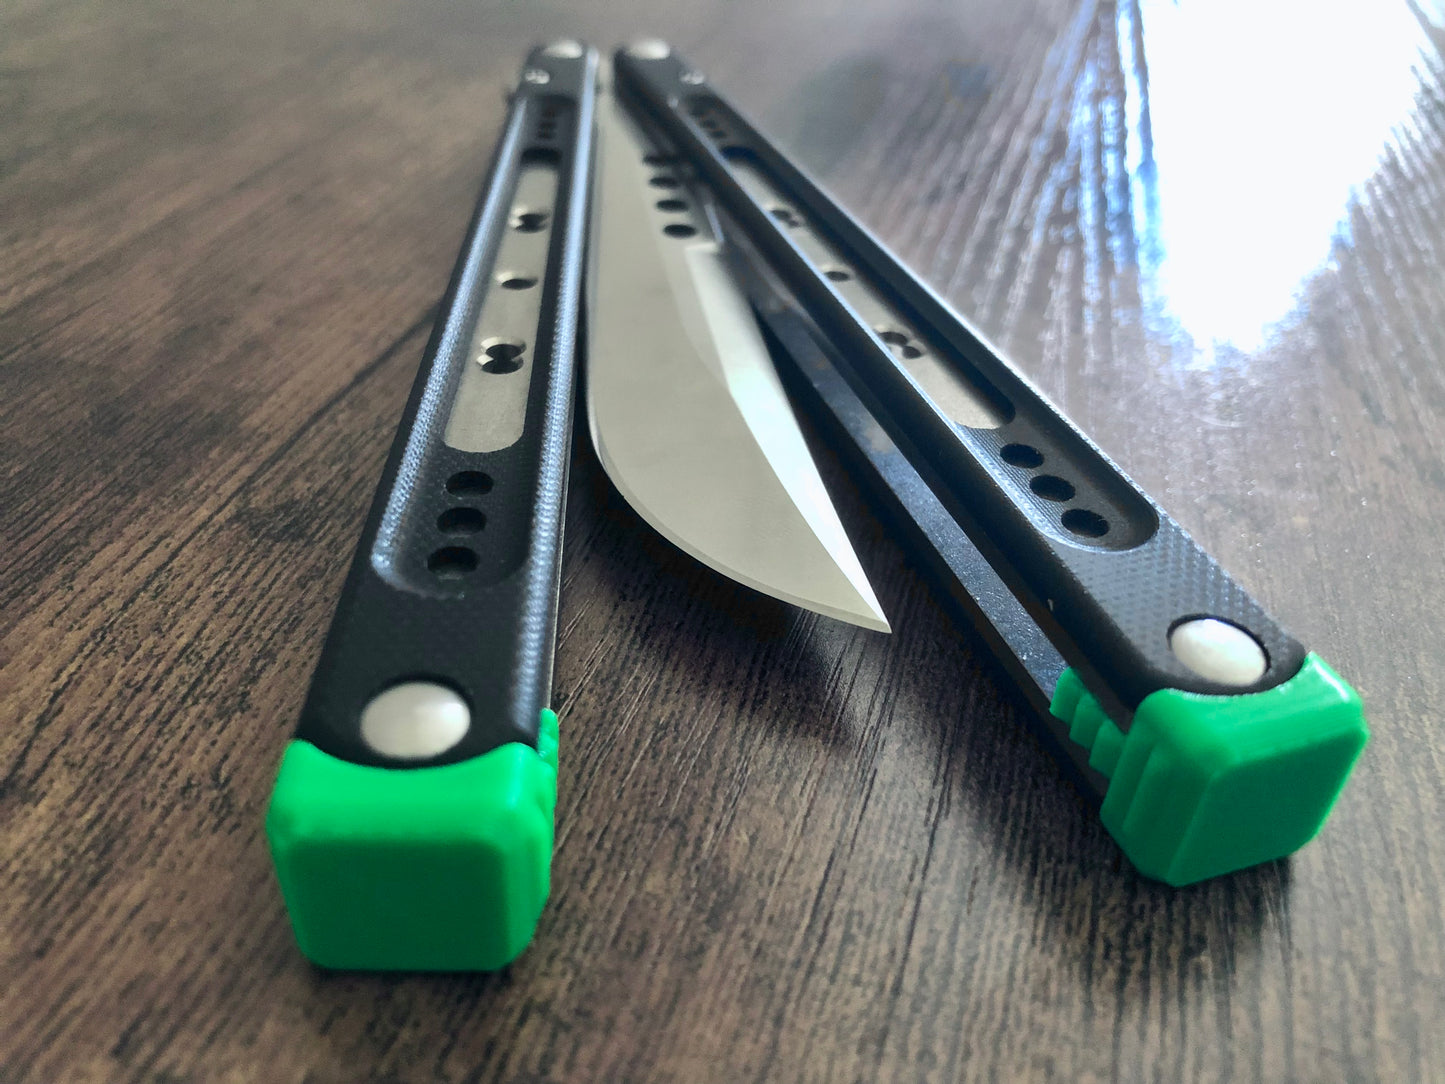 These Black Balisong Rebola v2 spacers are made in-house from a rubbery, shatter-proof polyurethane. They are ultra-lightweight extension spacers that reduce the stock handle-bias. They also feature positive sawtooth jimping and enable adjustable balance with up to 1x removable tungsten weight per spacer.